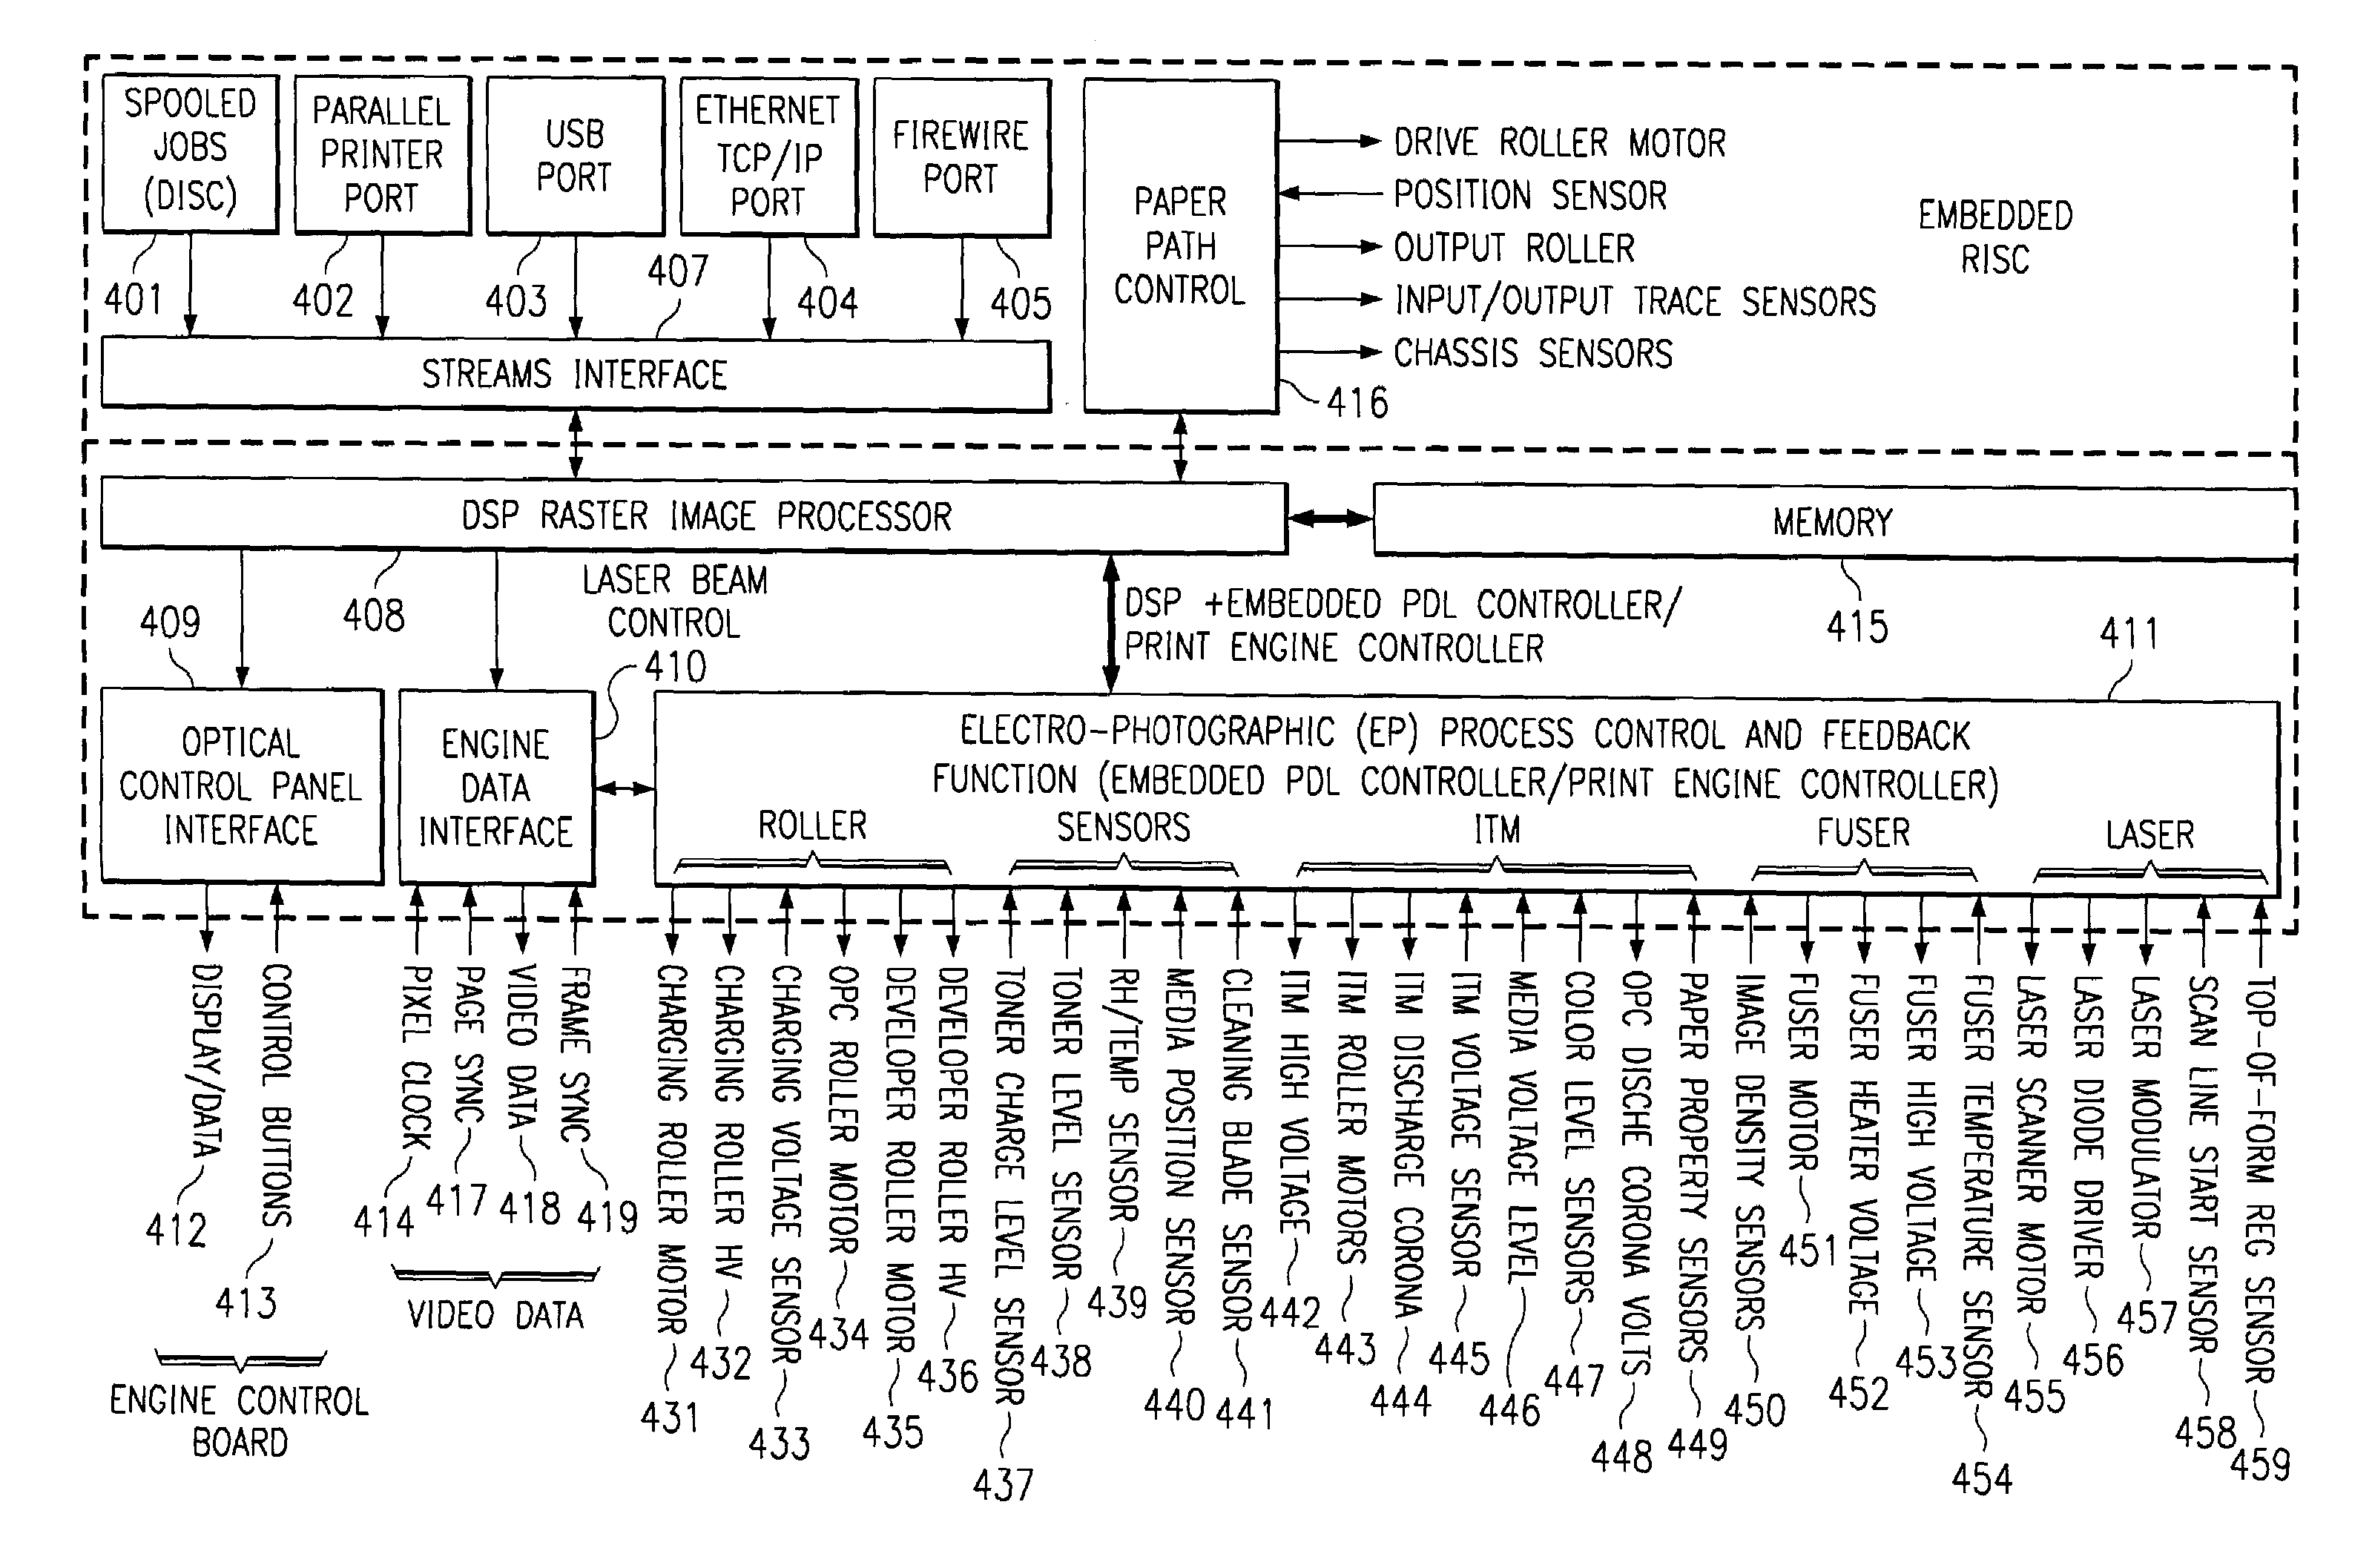 Integrated raster image processor and electro-photographic engine controller